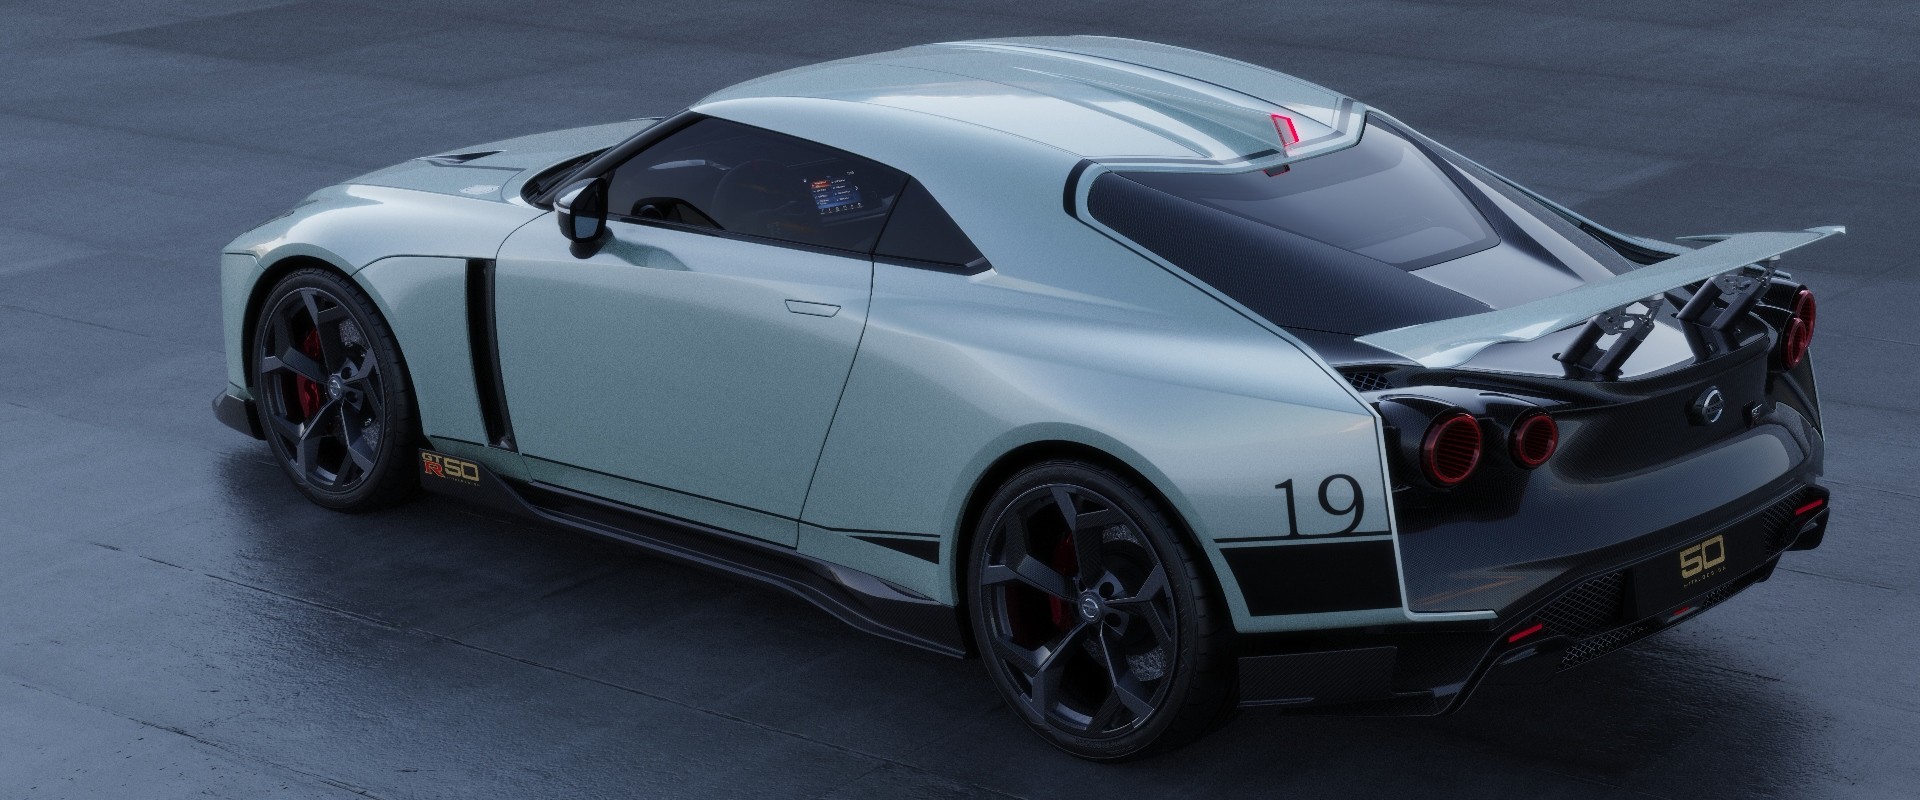 https://s1.cdn.autoevolution.com/images/news/gallery/next-generation-nissan-gt-r-rendered-looks-like-a-mid-engined-supercar_11.jpg